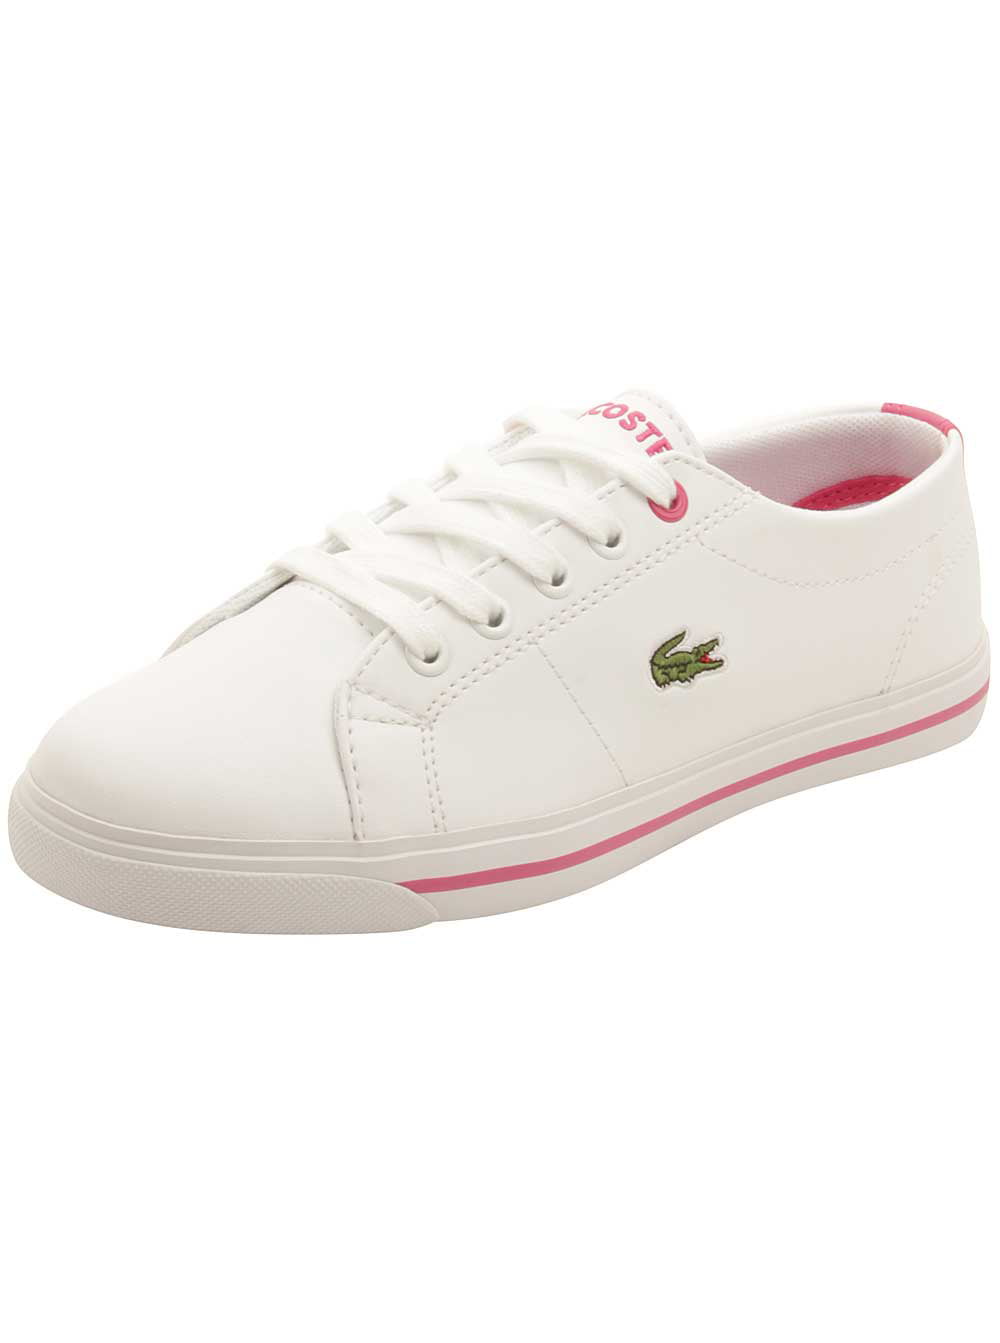 Lacoste Toddler Marcel 117 Sneakers in White/Pink